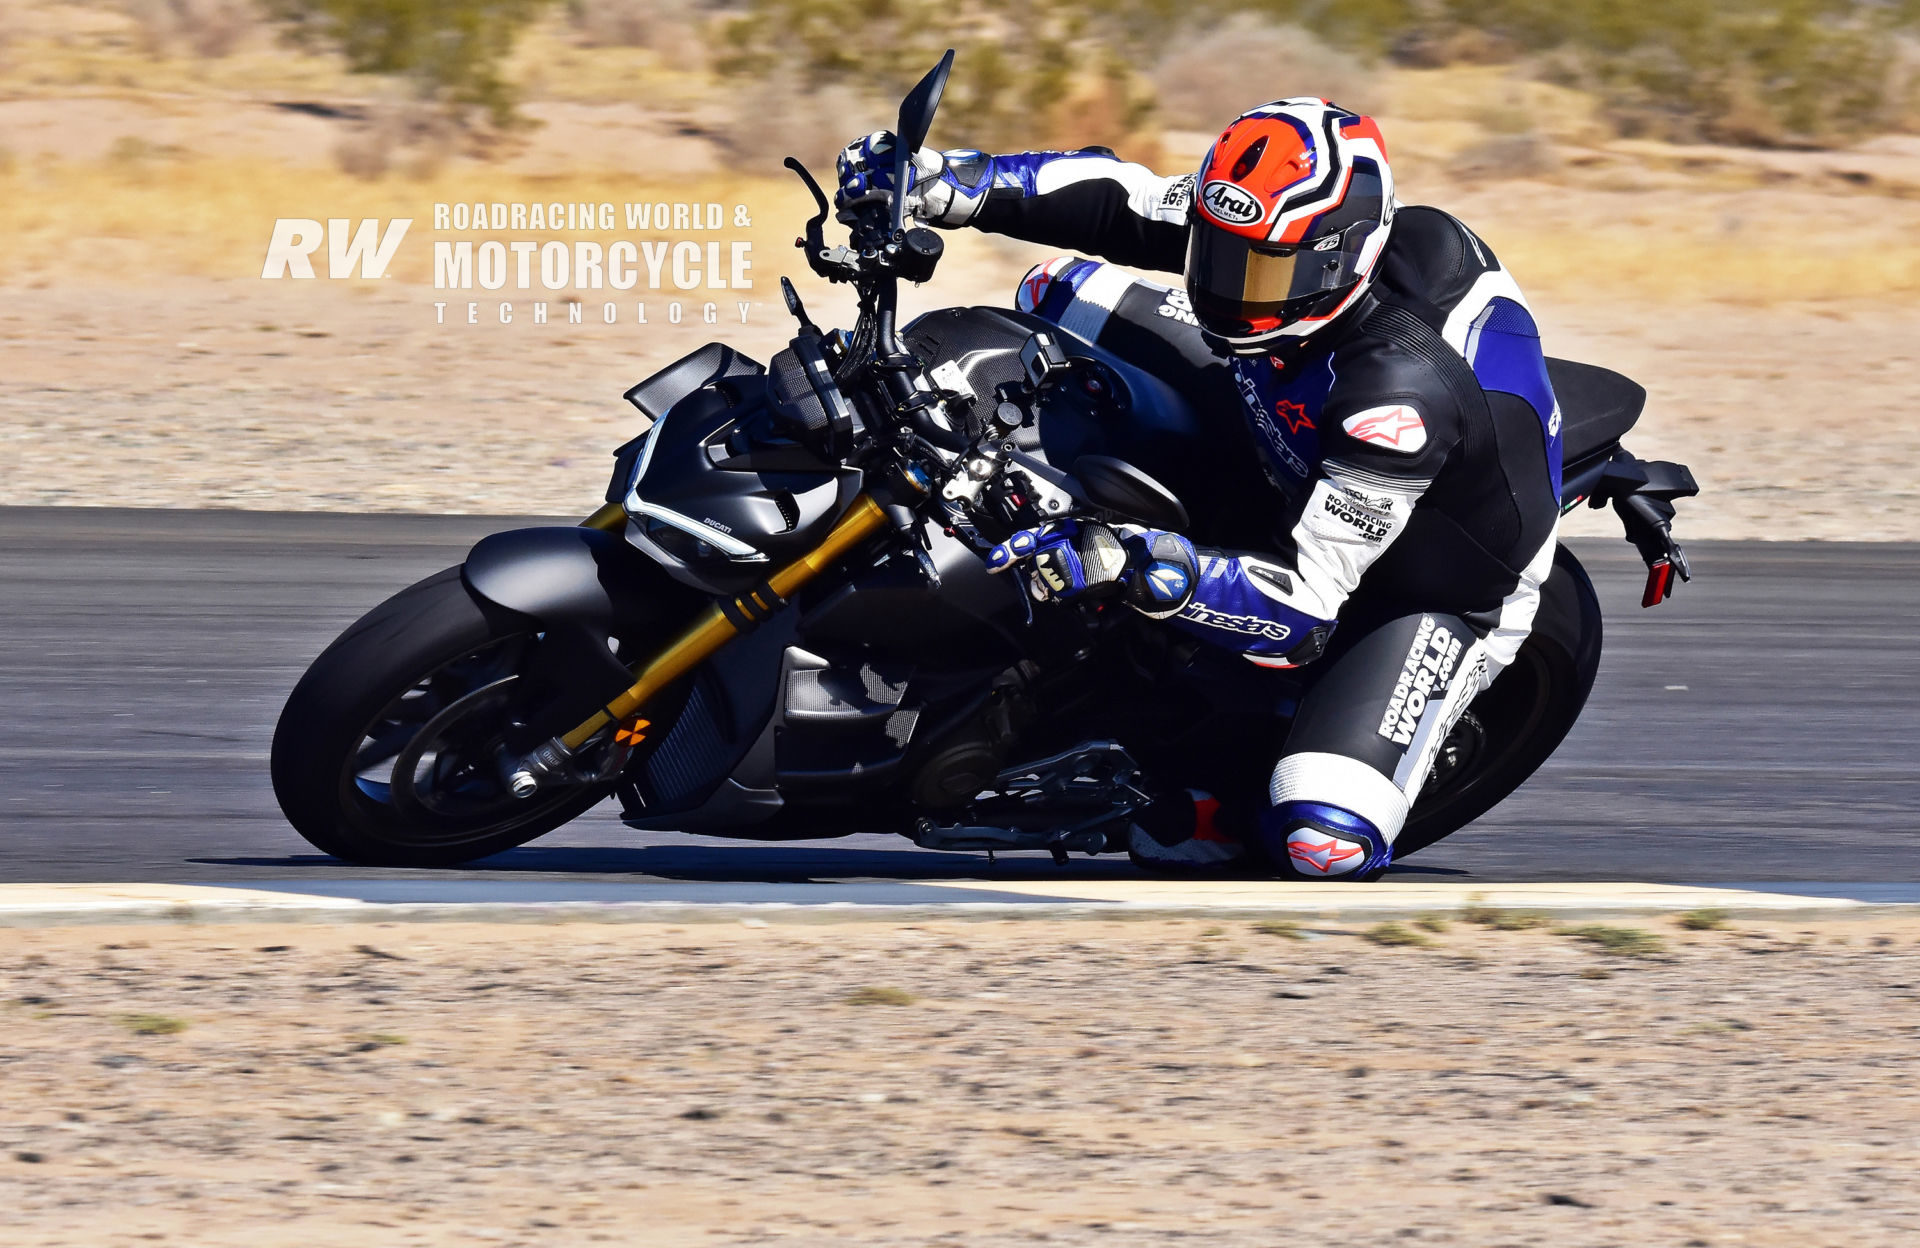 Racing Editor Chris Ulrich hustled a Ducati Streetfighter V4 around Chuckwalla Valley Raceway earlier in the year, commenting specifically on how strong the bike felt in fifth gear. Prescient. Photo by Michael Gougis.